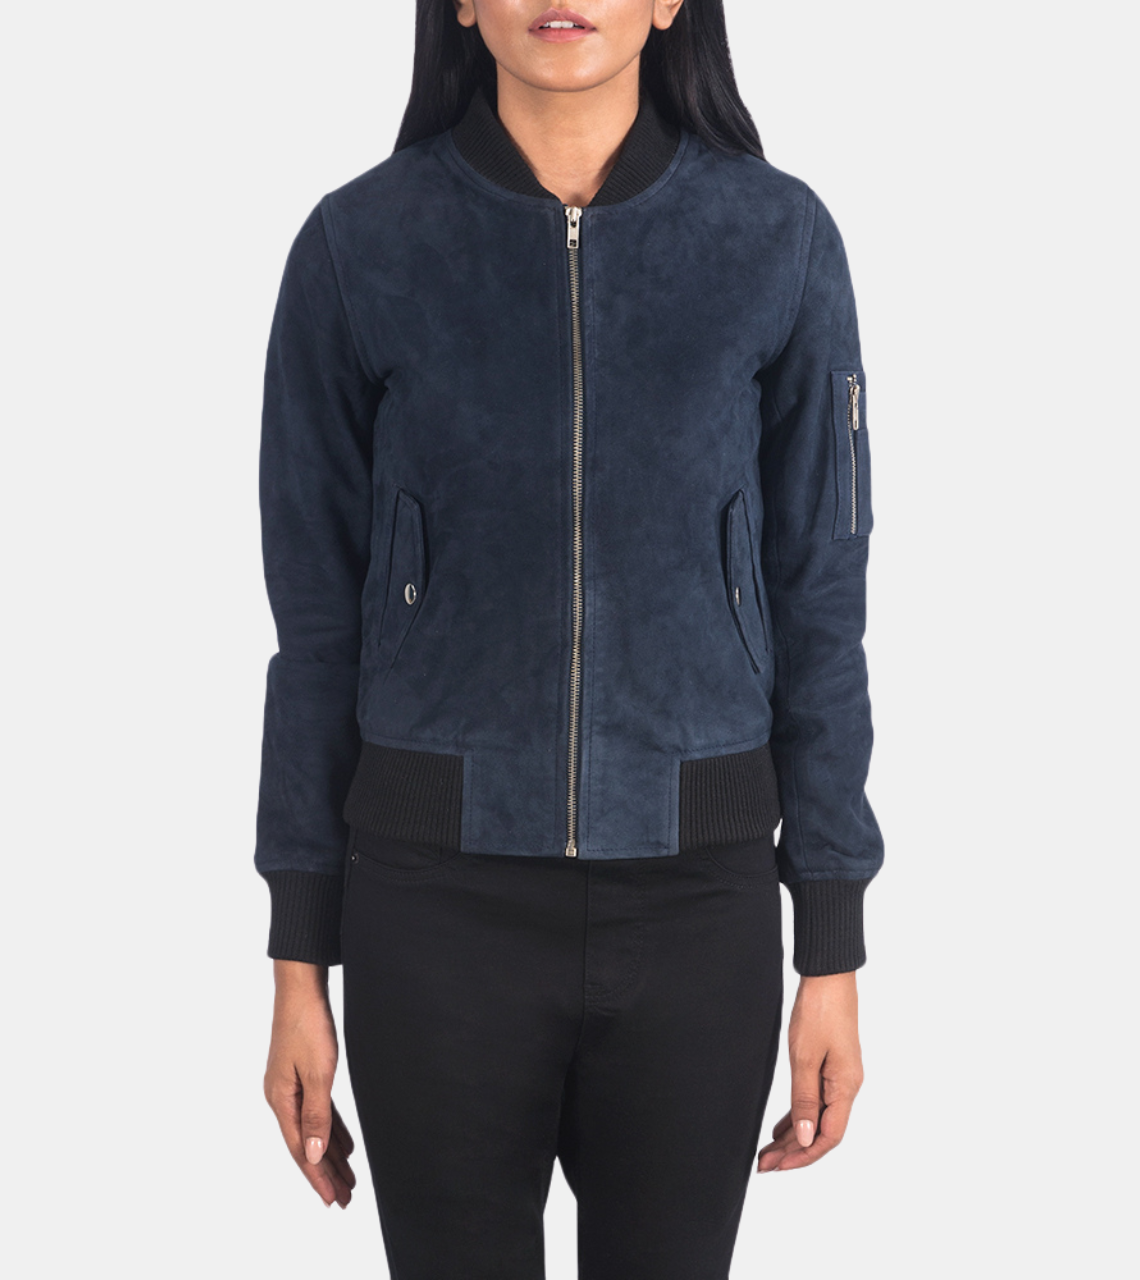 Anoura Women's Blue Suede Bomber Leather Jacket